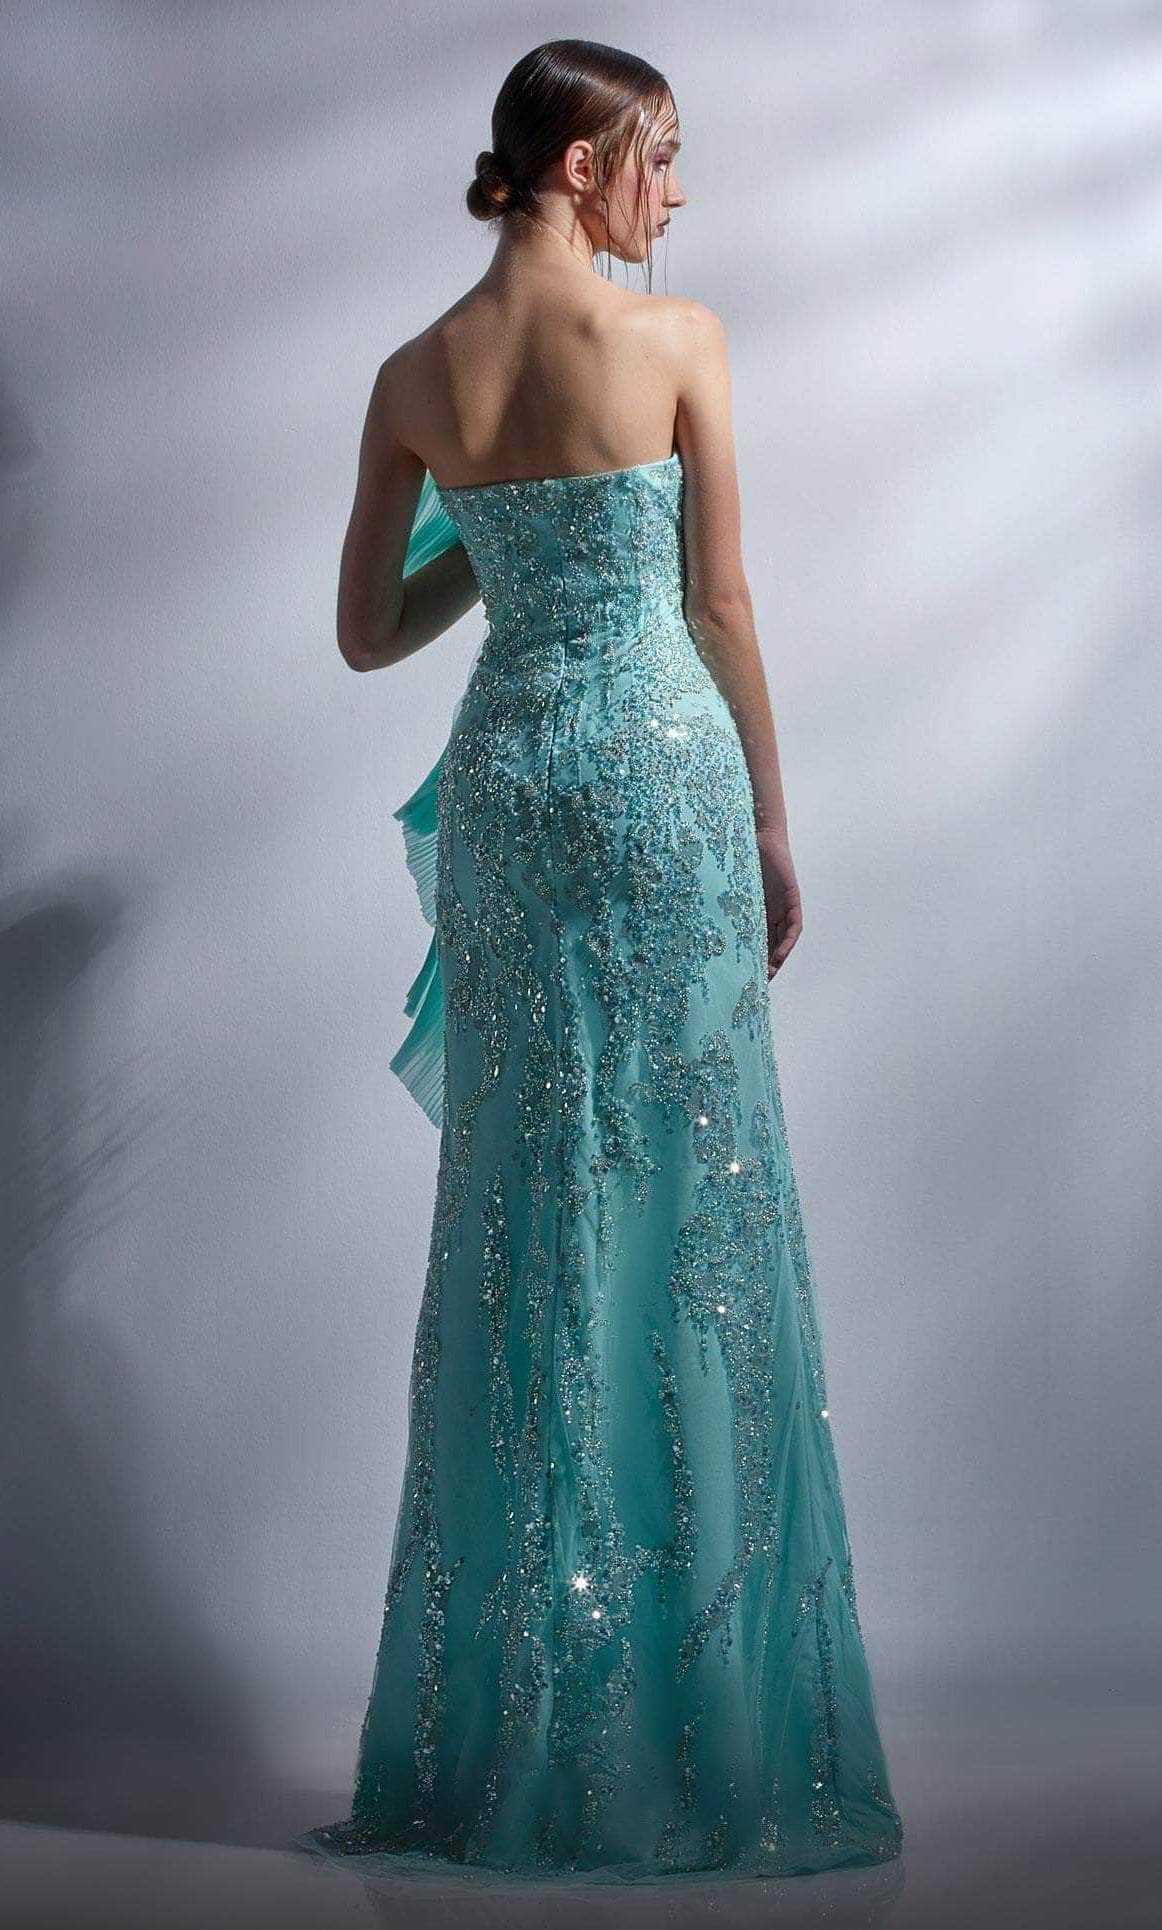 MNM Couture, MNM COUTURE G1281 - Beaded Appliqued Prom Gown